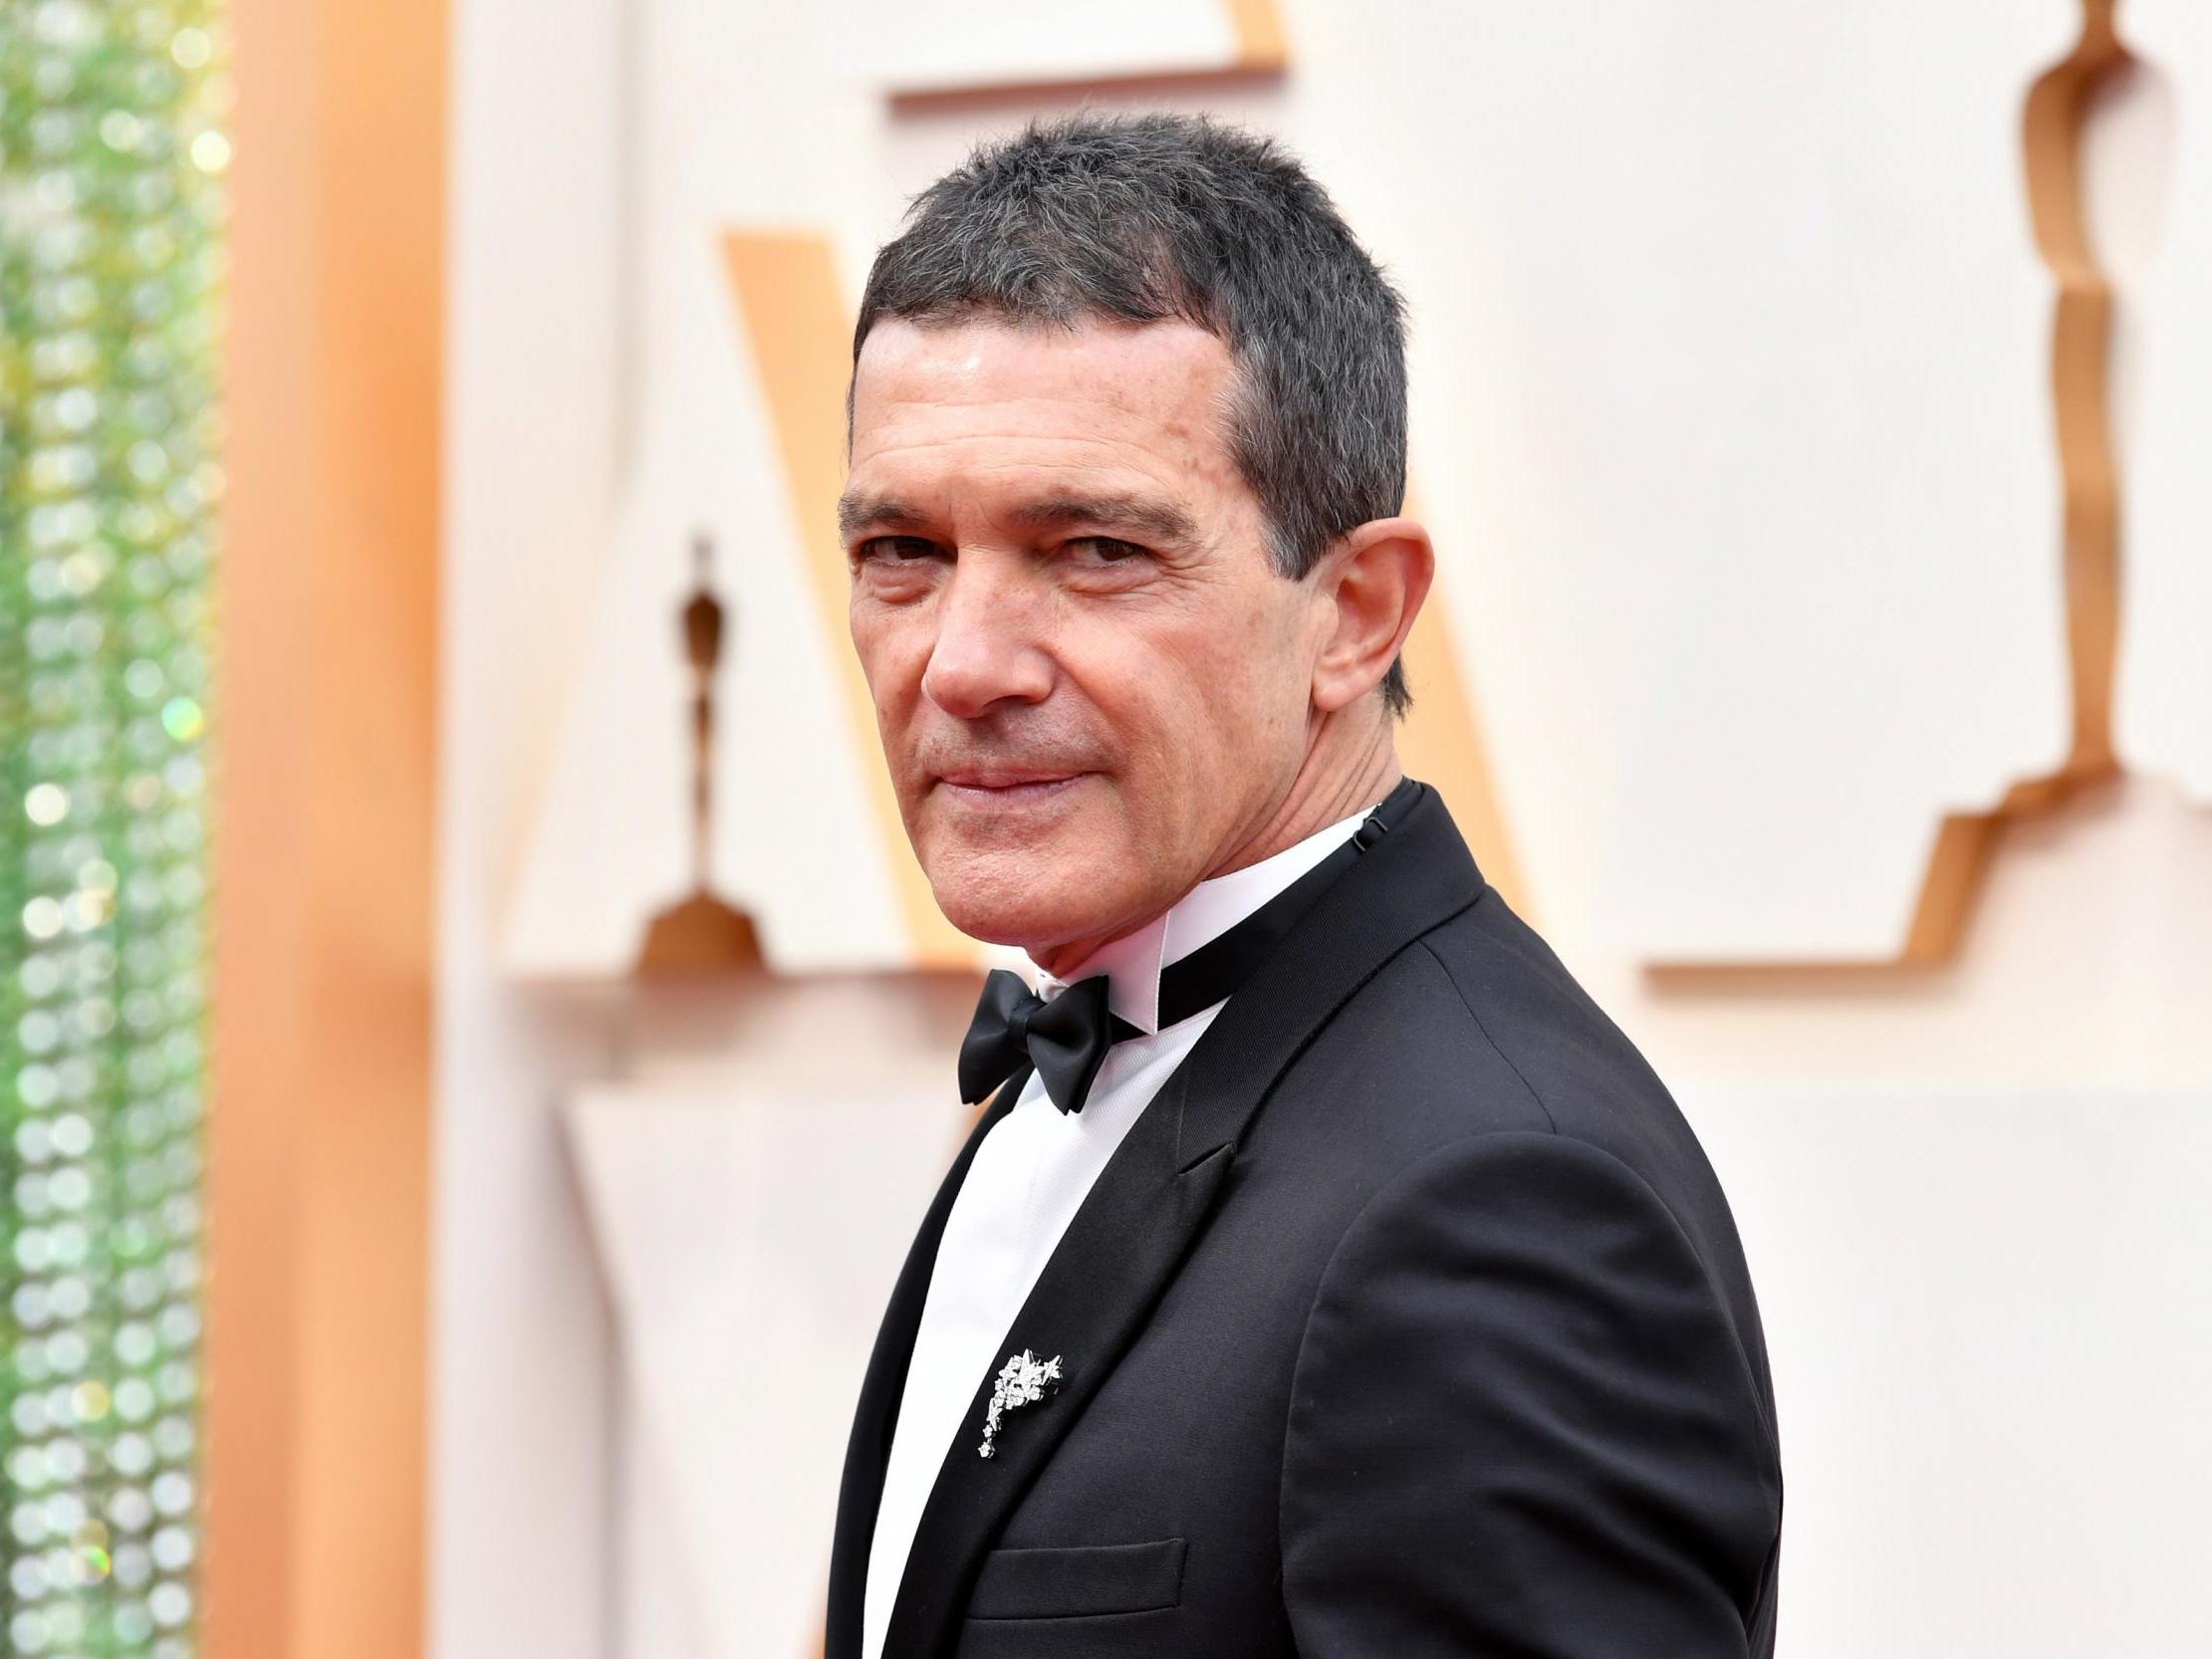 Antonio Banderas revealed that he had tested positive for Covid-19 on his 60th birthday